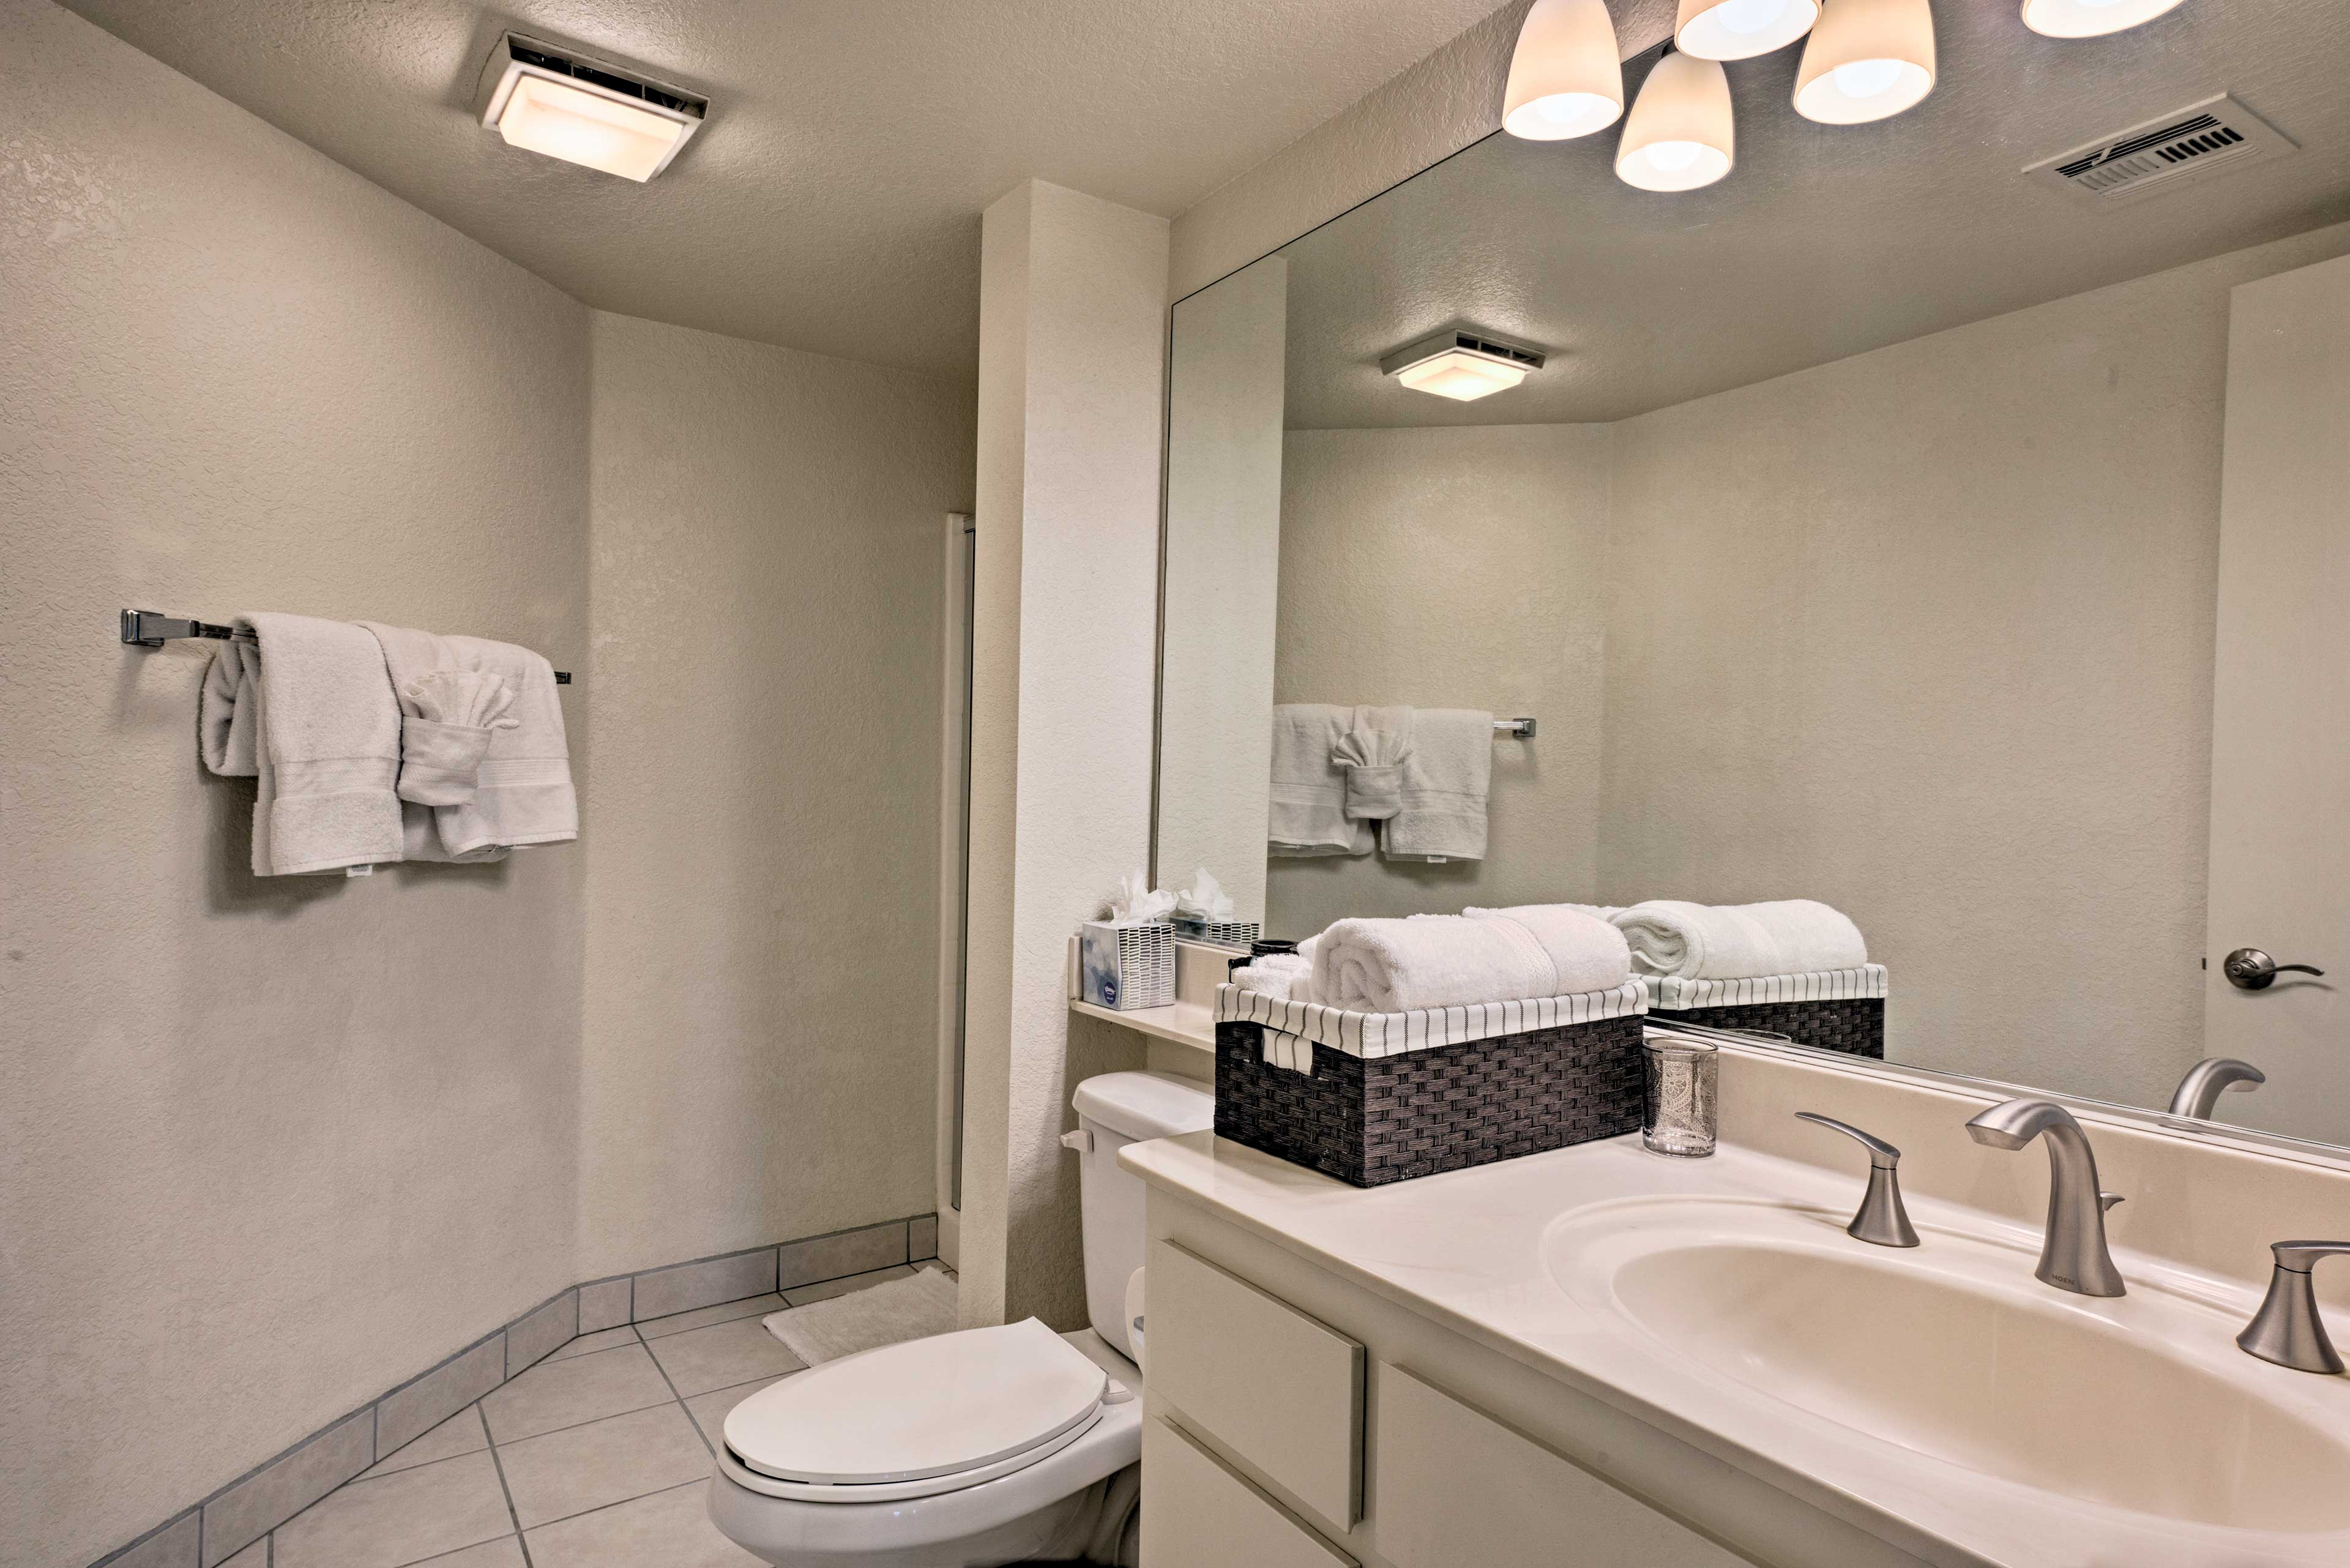 A second full bathroom is located next to the second bedroom.